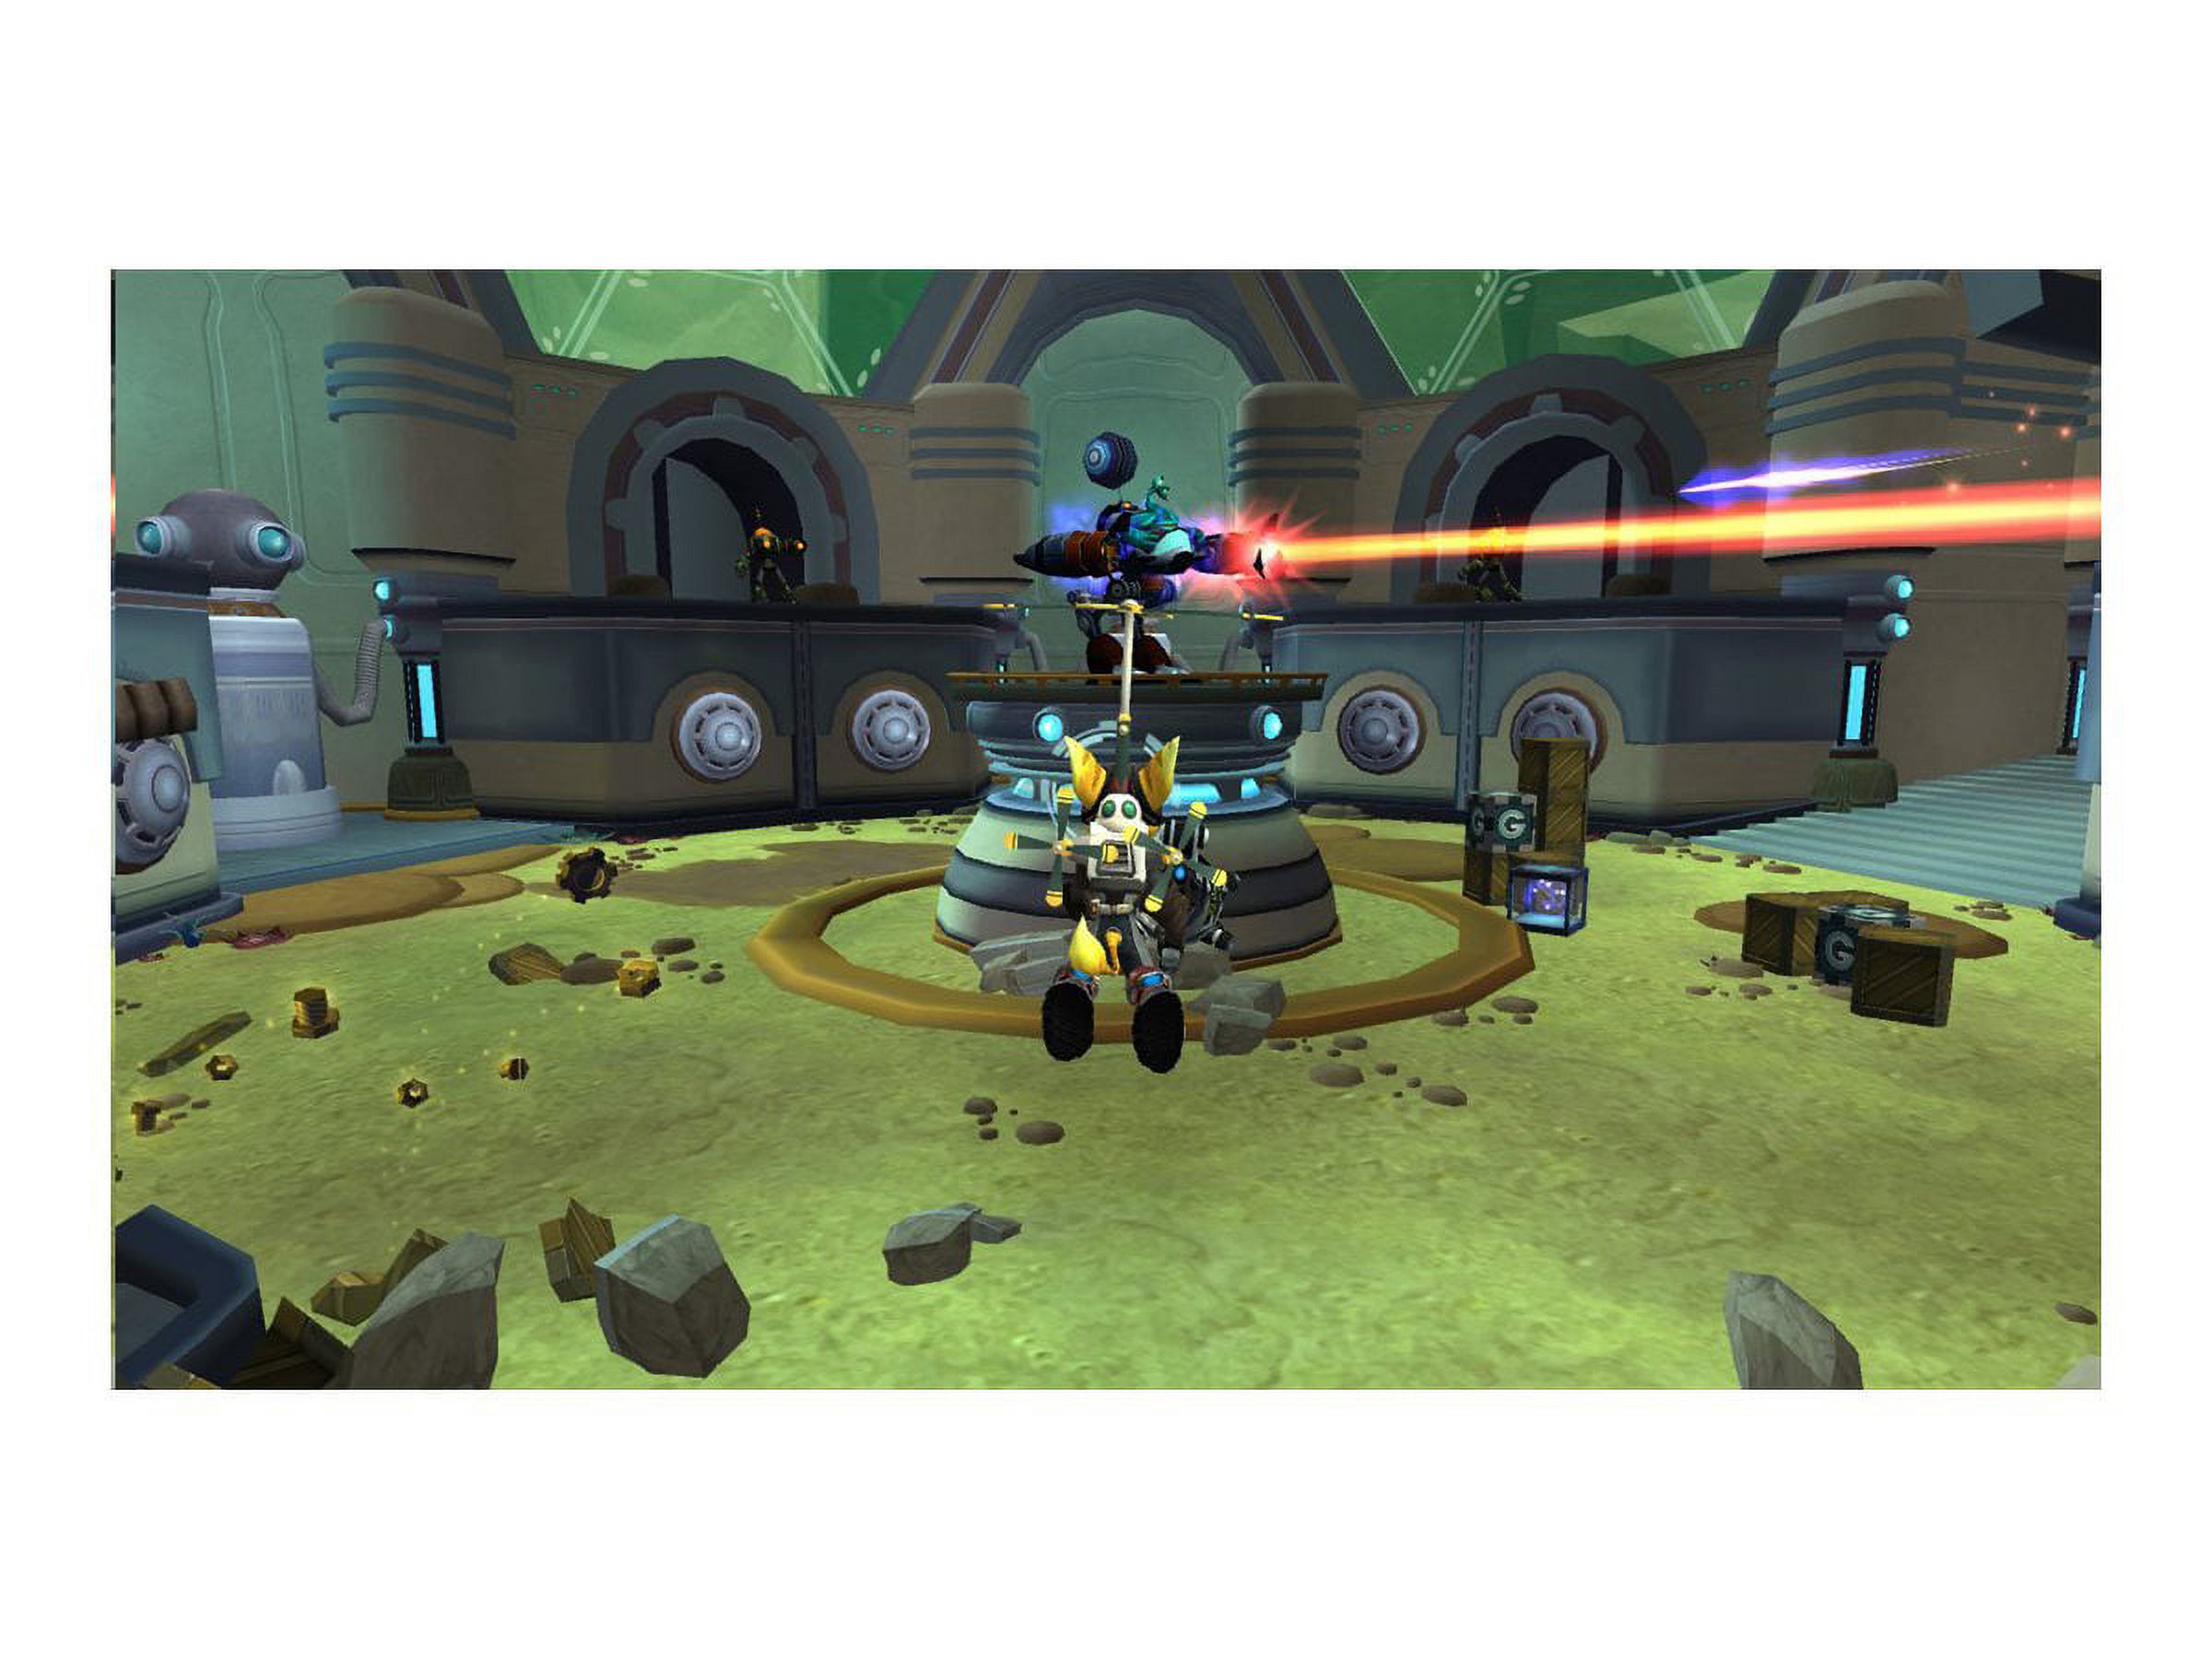 Ratchet & Clank Collection, Sony, PlayStation 3, 711719982821 - image 3 of 4